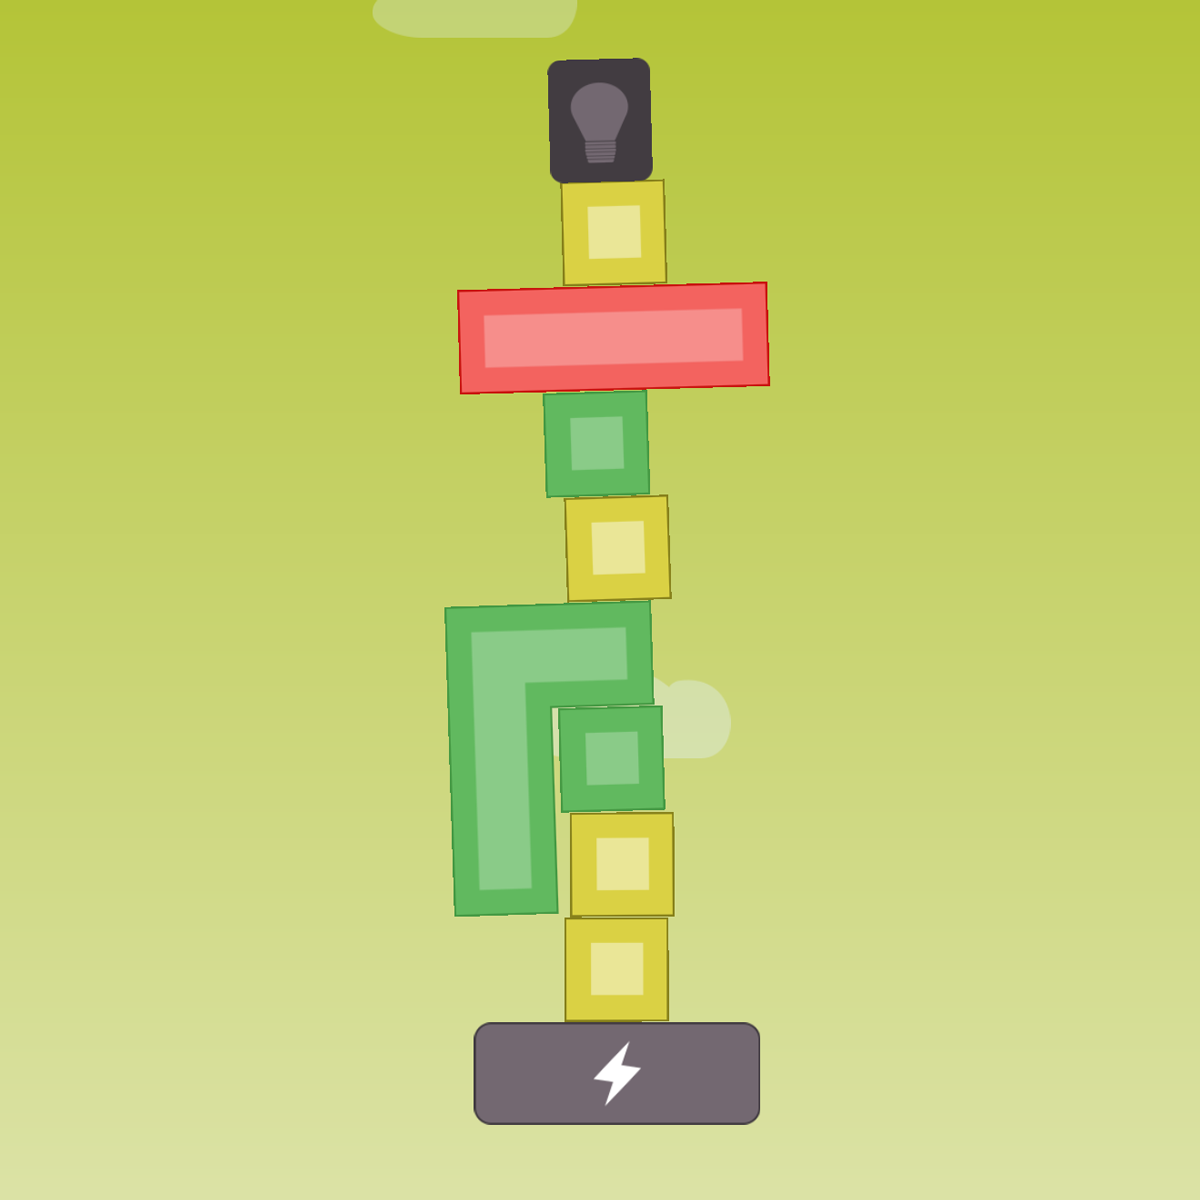 Heart Box - free physics puzzles game instal the new version for android